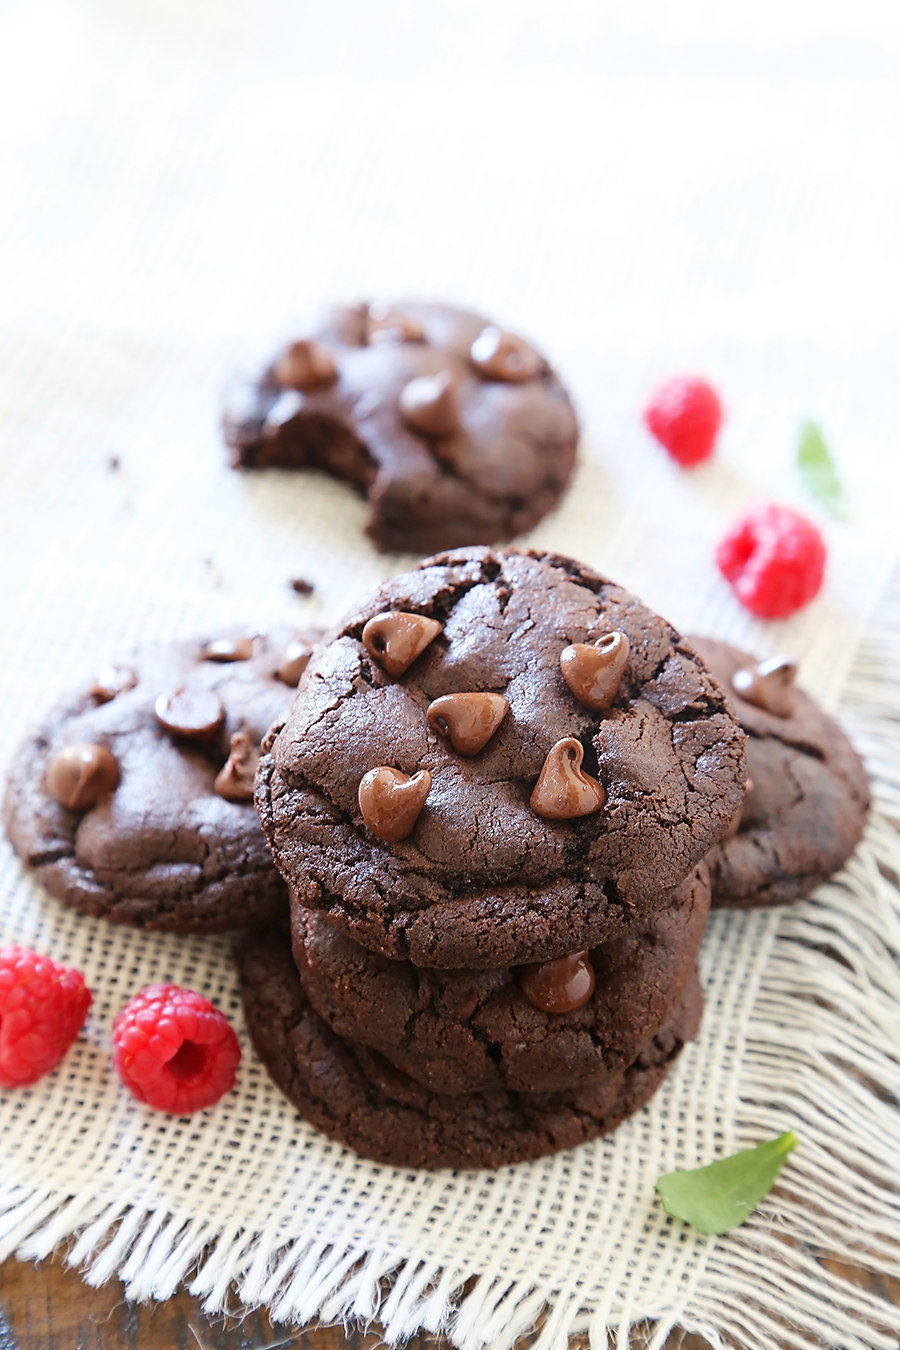 Soft & Chewy Double Chocolate Cookies - These cookies are melt-in-your-mouth good, and so easy to make. Less than 10 ingredients + 10 minutes in the oven! thecomfortofcooking.com